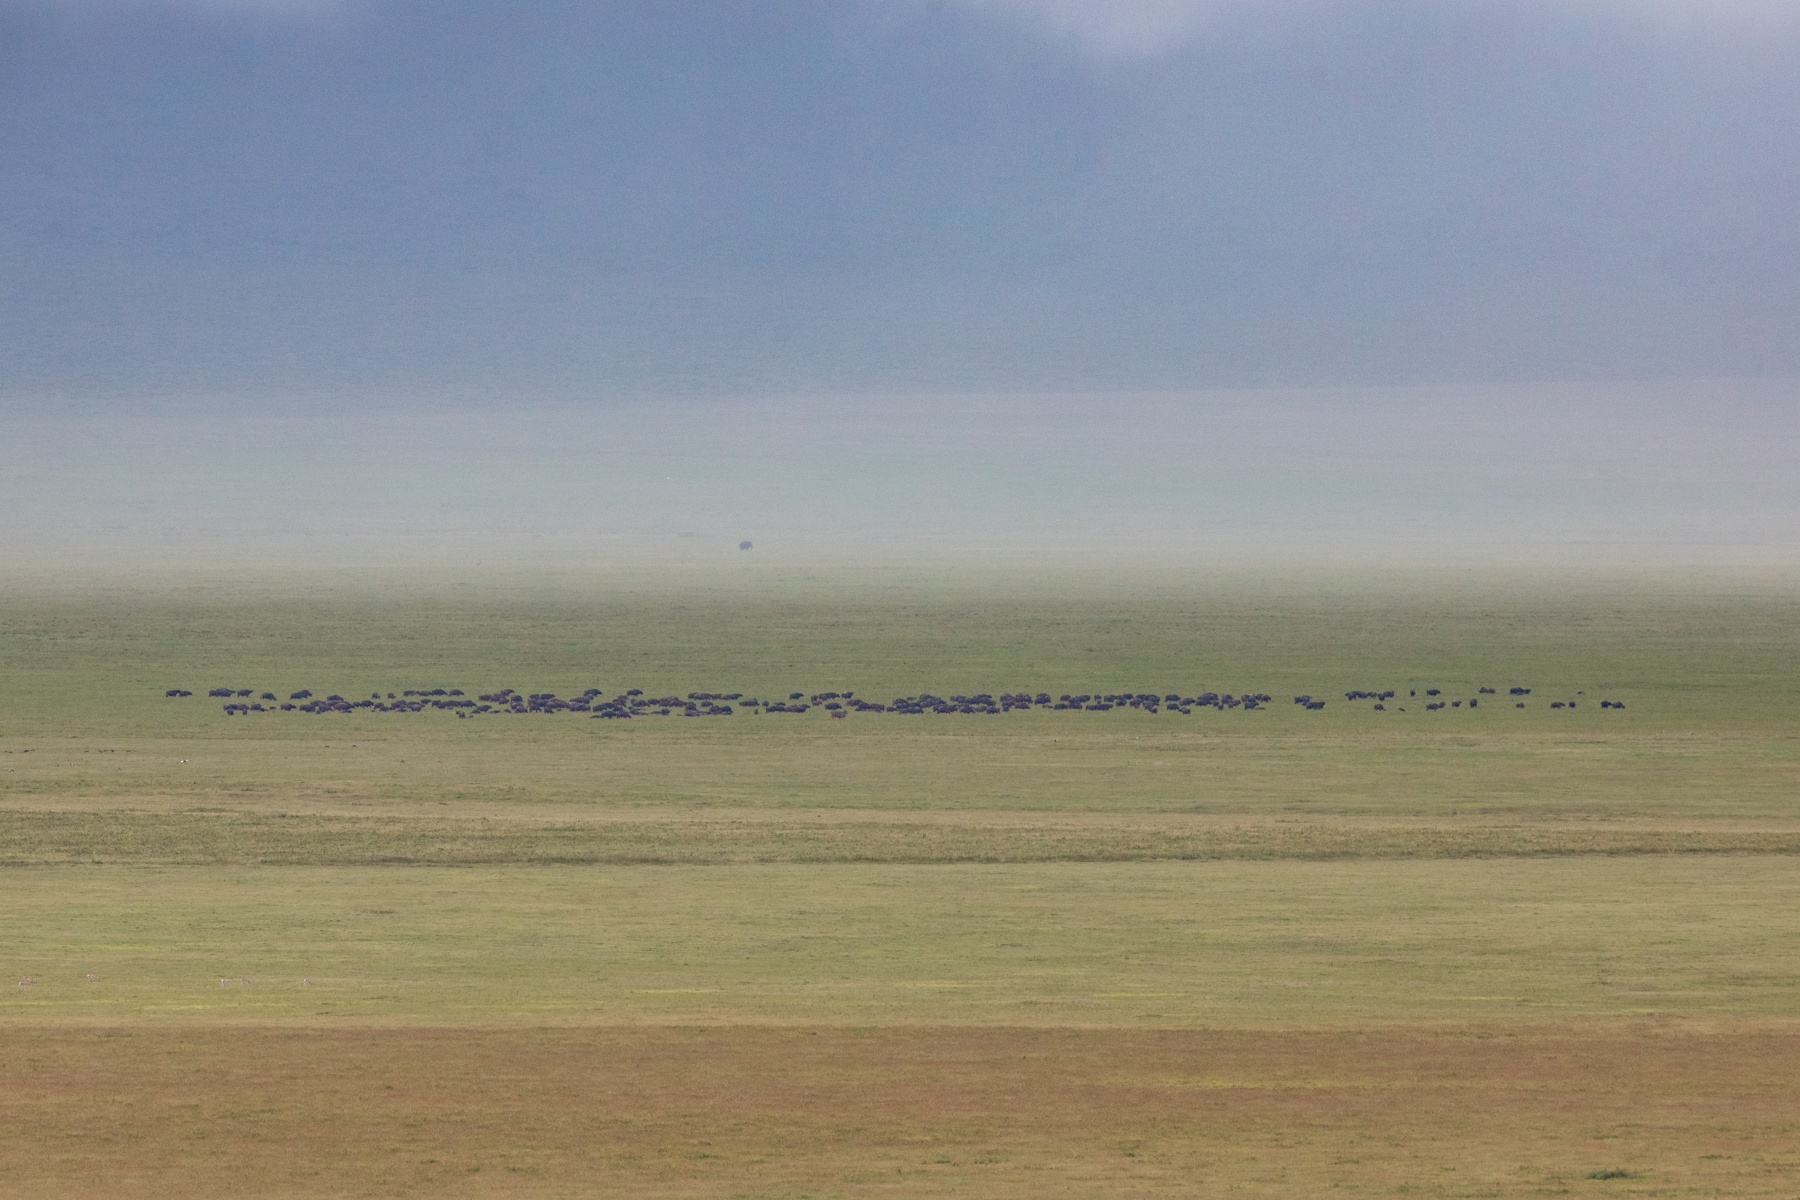 The vast plains of Ngorongoro Crater are home to so much wildlife. Here a grazing herd of African Buffalo form a line in front of a distant elephant